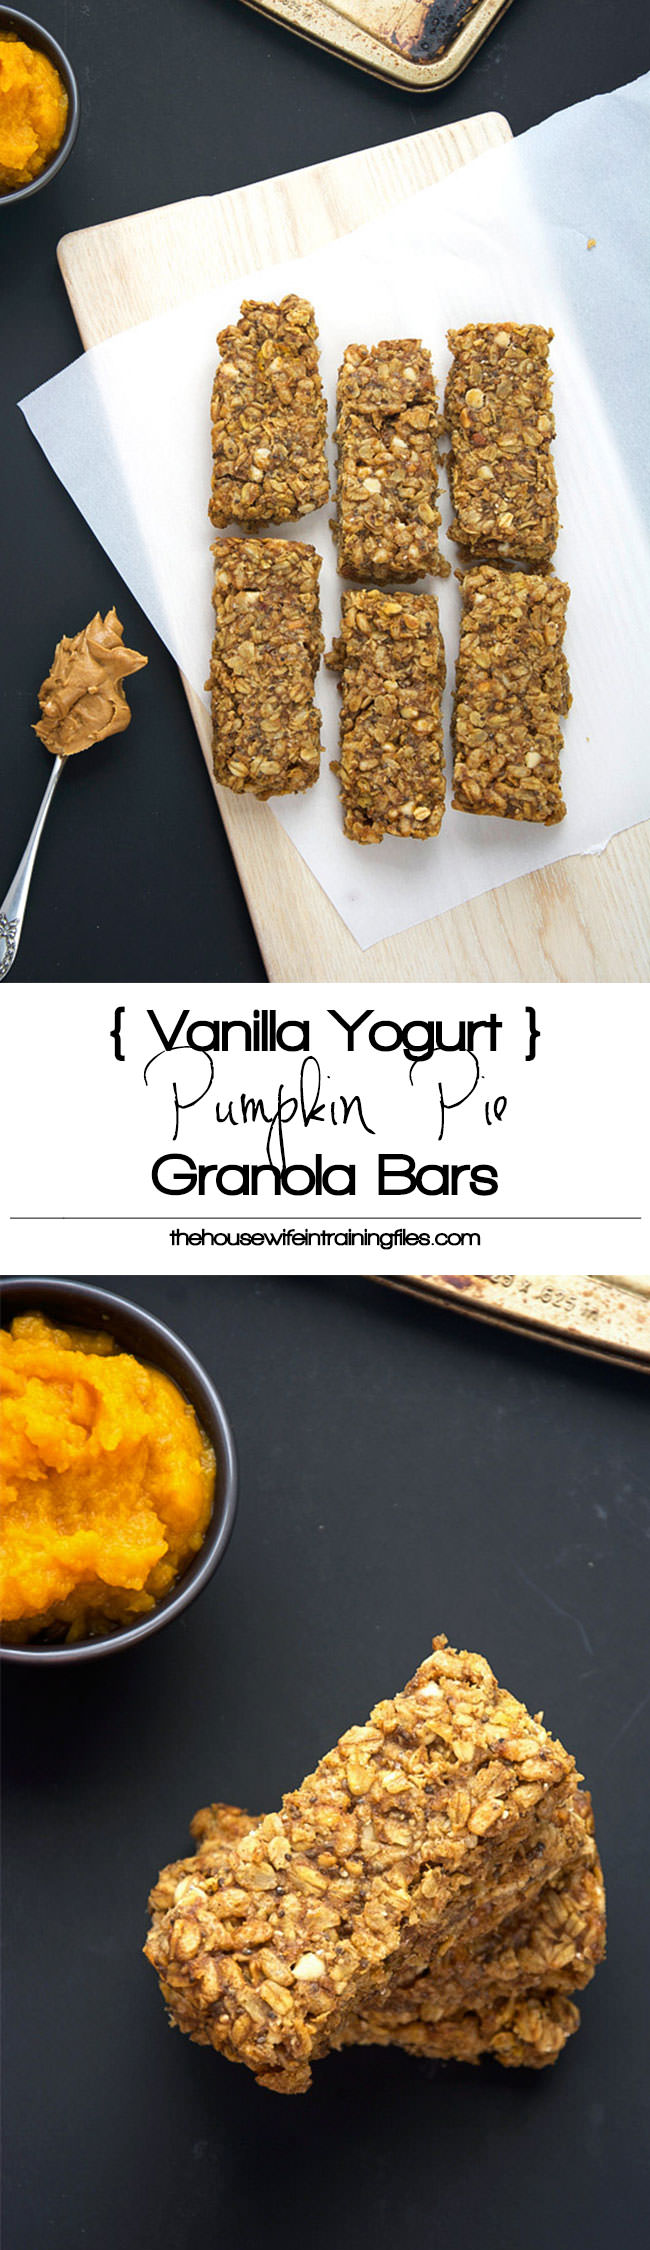 A homemade granola bar bursting with fall flavors of pumpkin pie spice, cinnamon and vanilla yogurt chips! These bars are full of flavor, moist and healthy so you can indulge this holiday season! #glutenfree #healthy